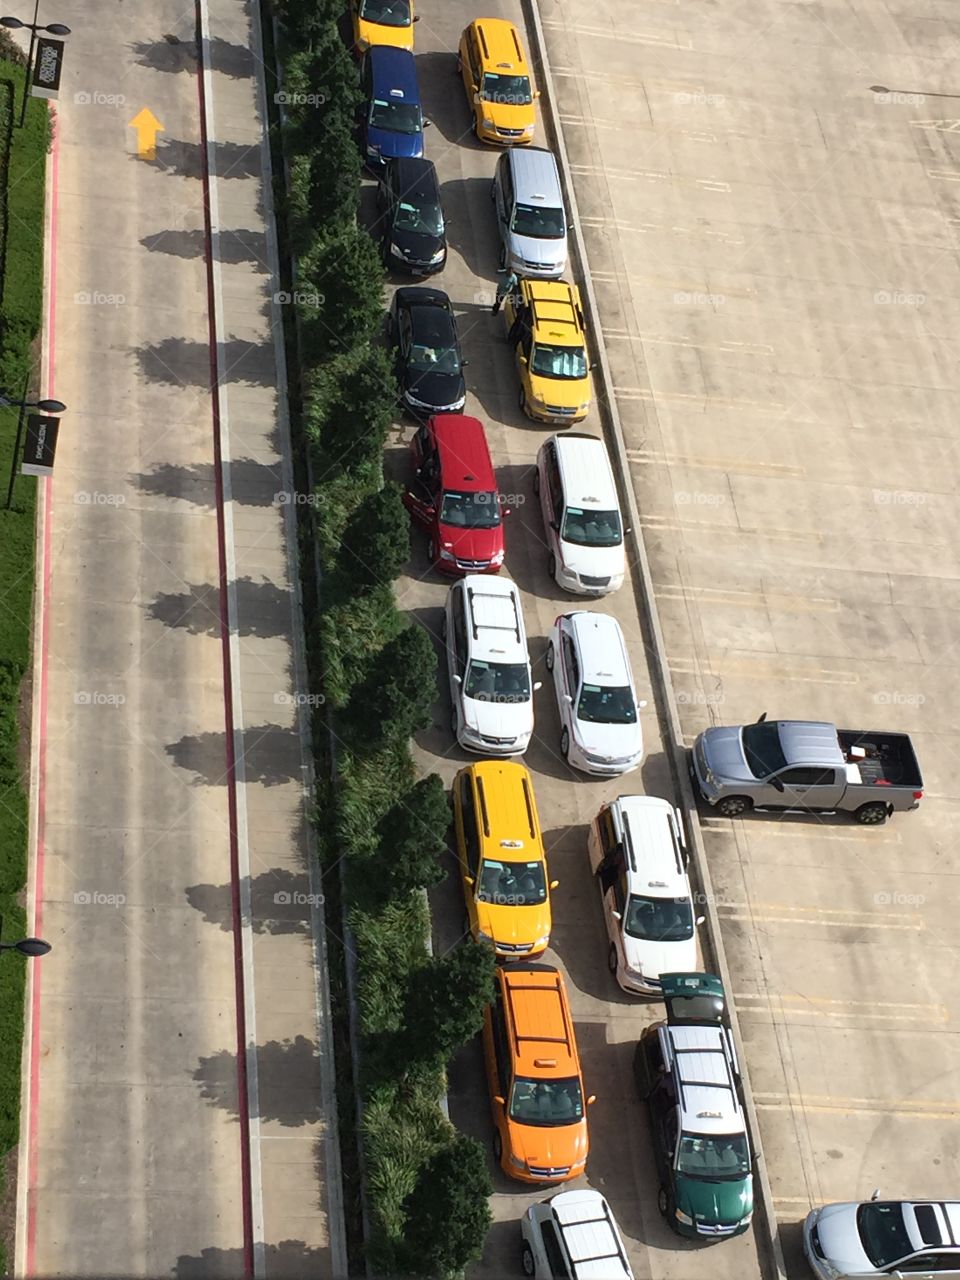 "Matchbox" cars - View from Westin at Houston Galleria